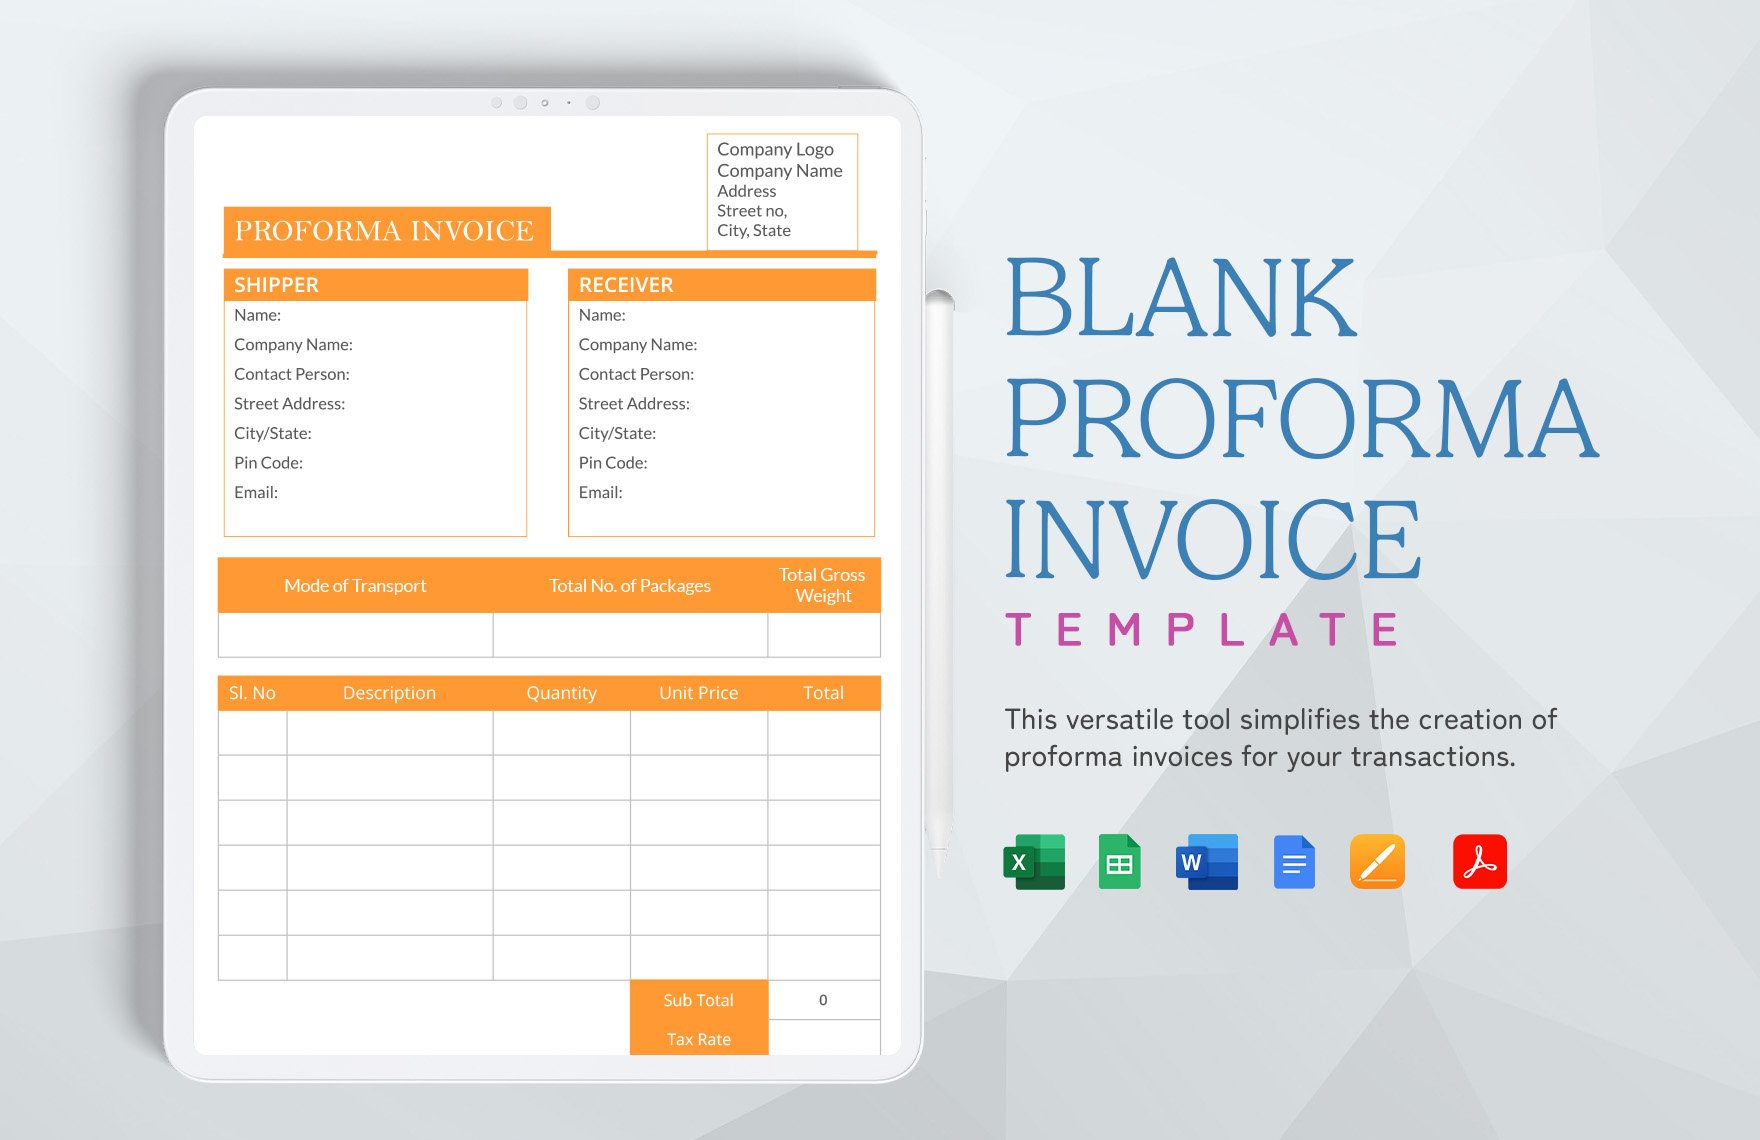 Blank Proforma Invoice Template in Word, Google Docs, Excel, PDF, Google Sheets, Apple Pages